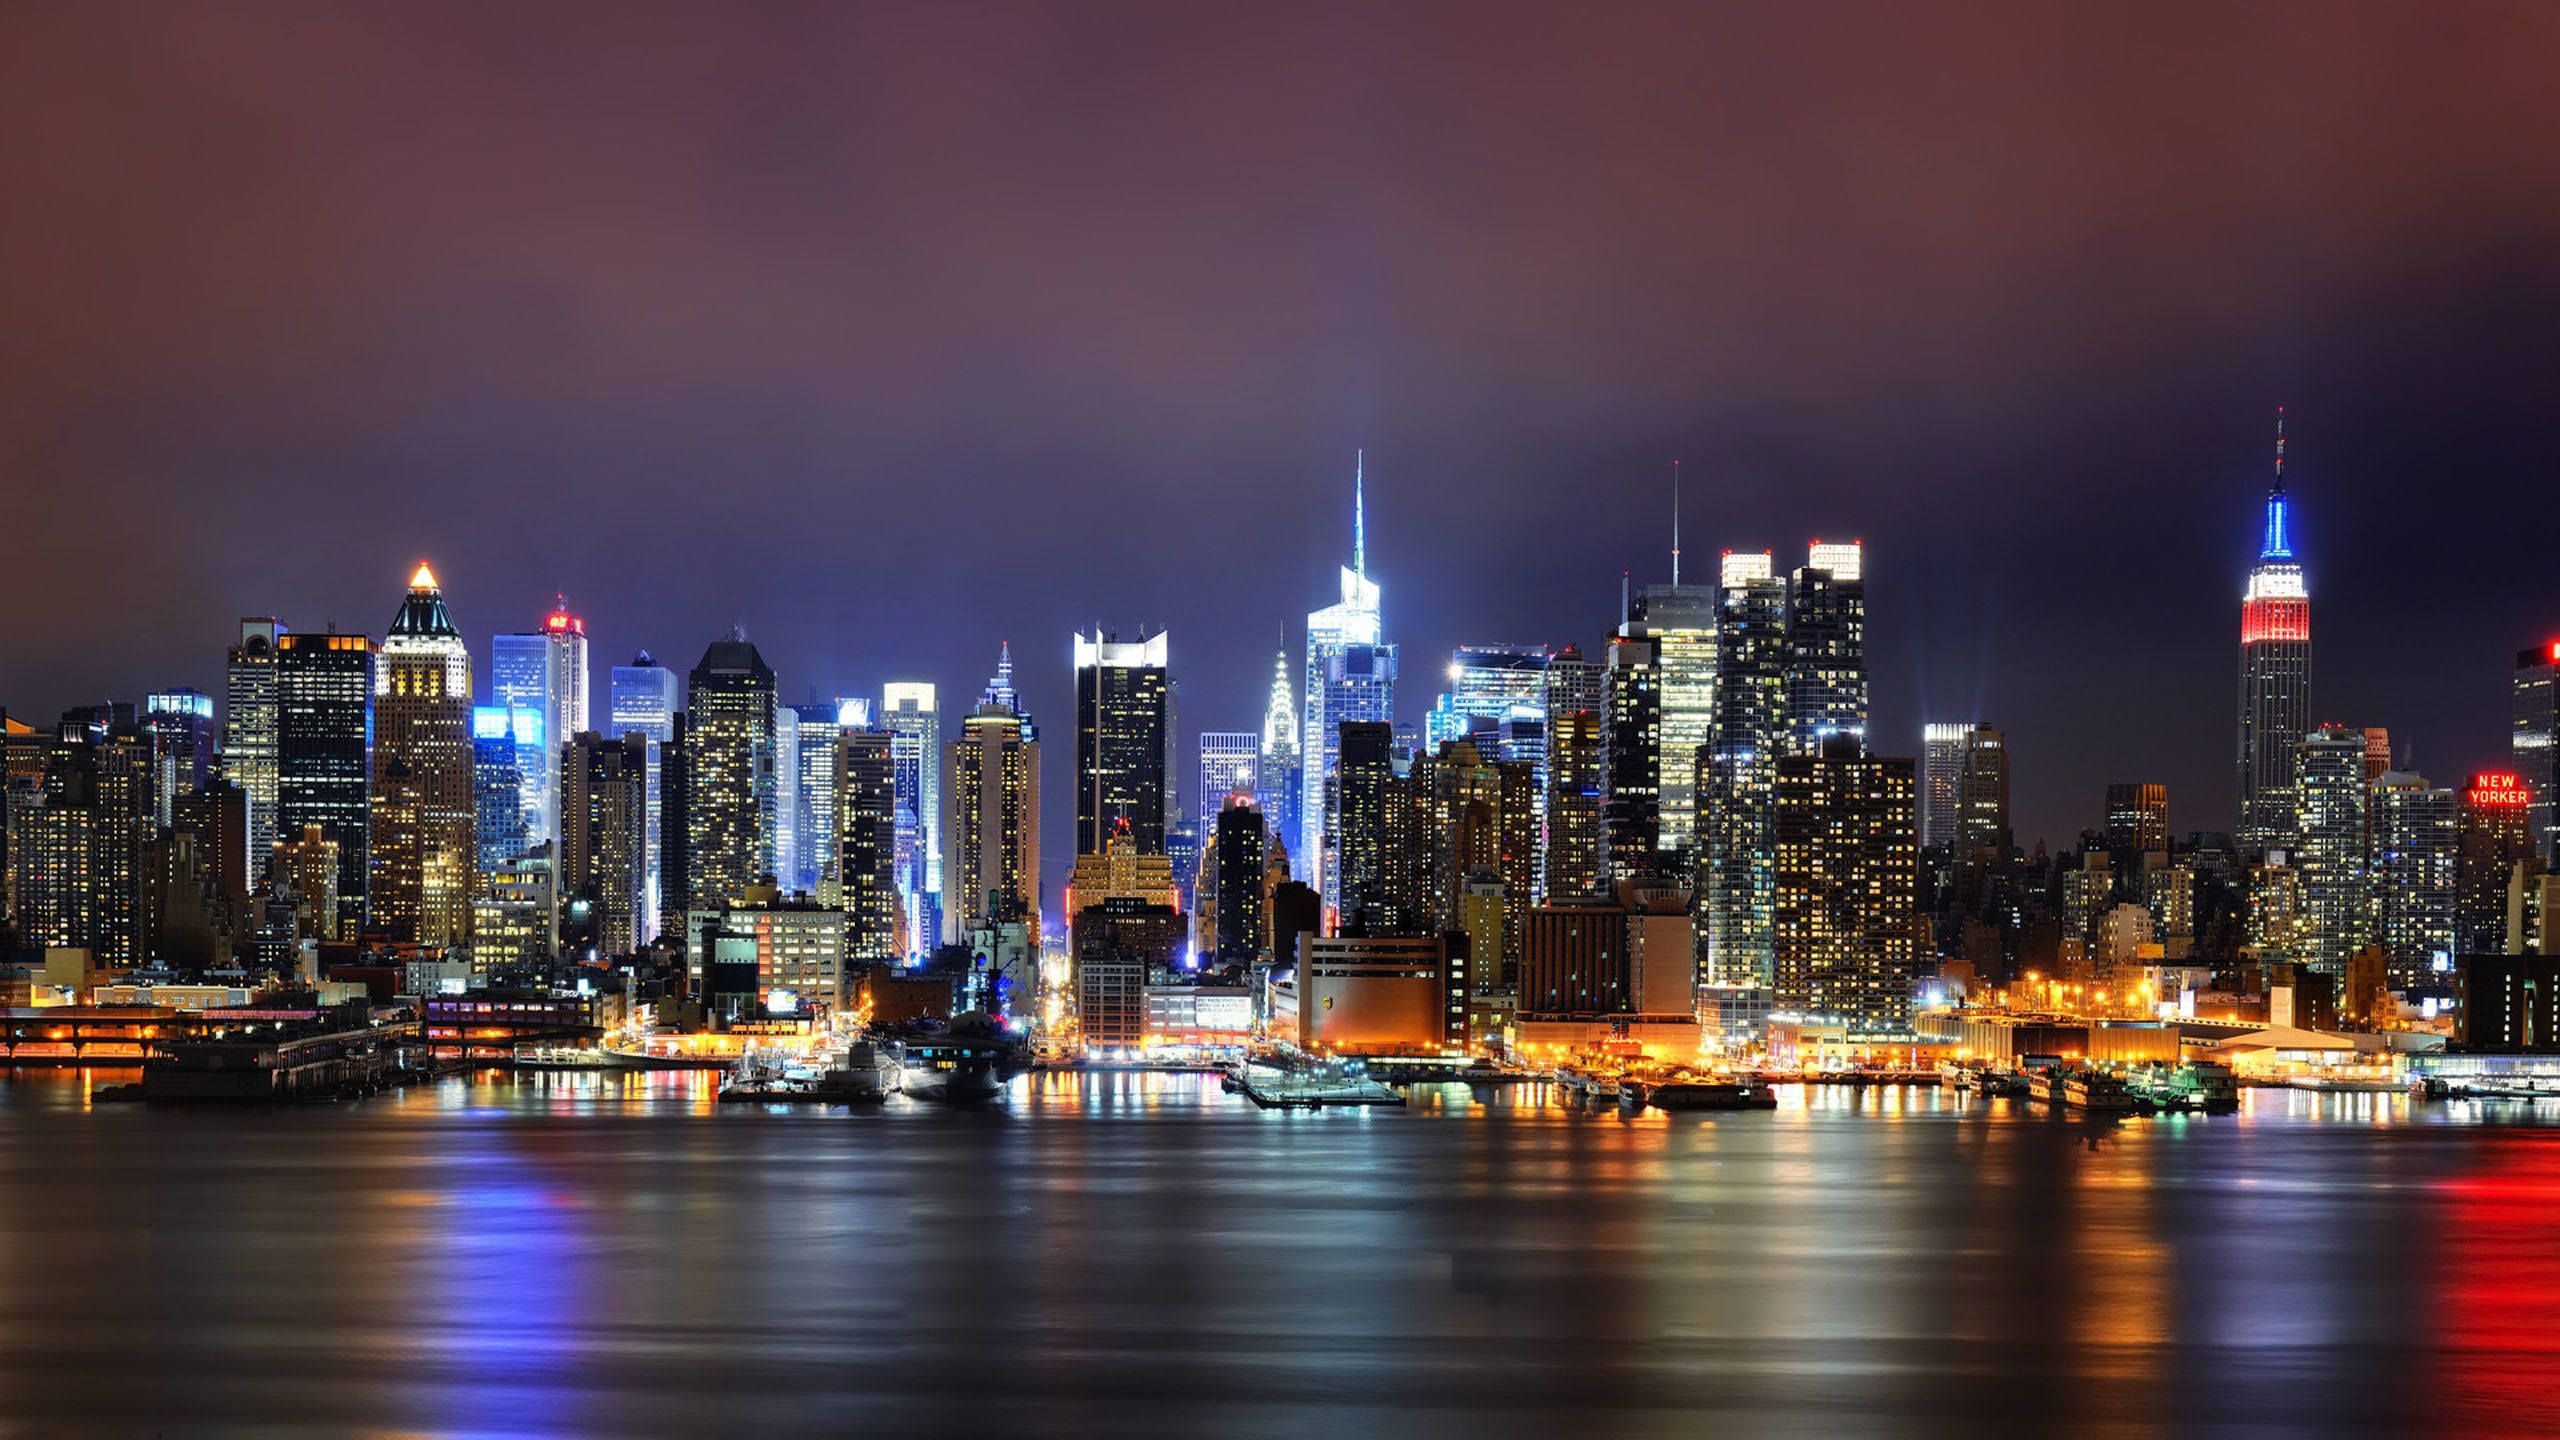 New York City Skyline Wallpaper background picture